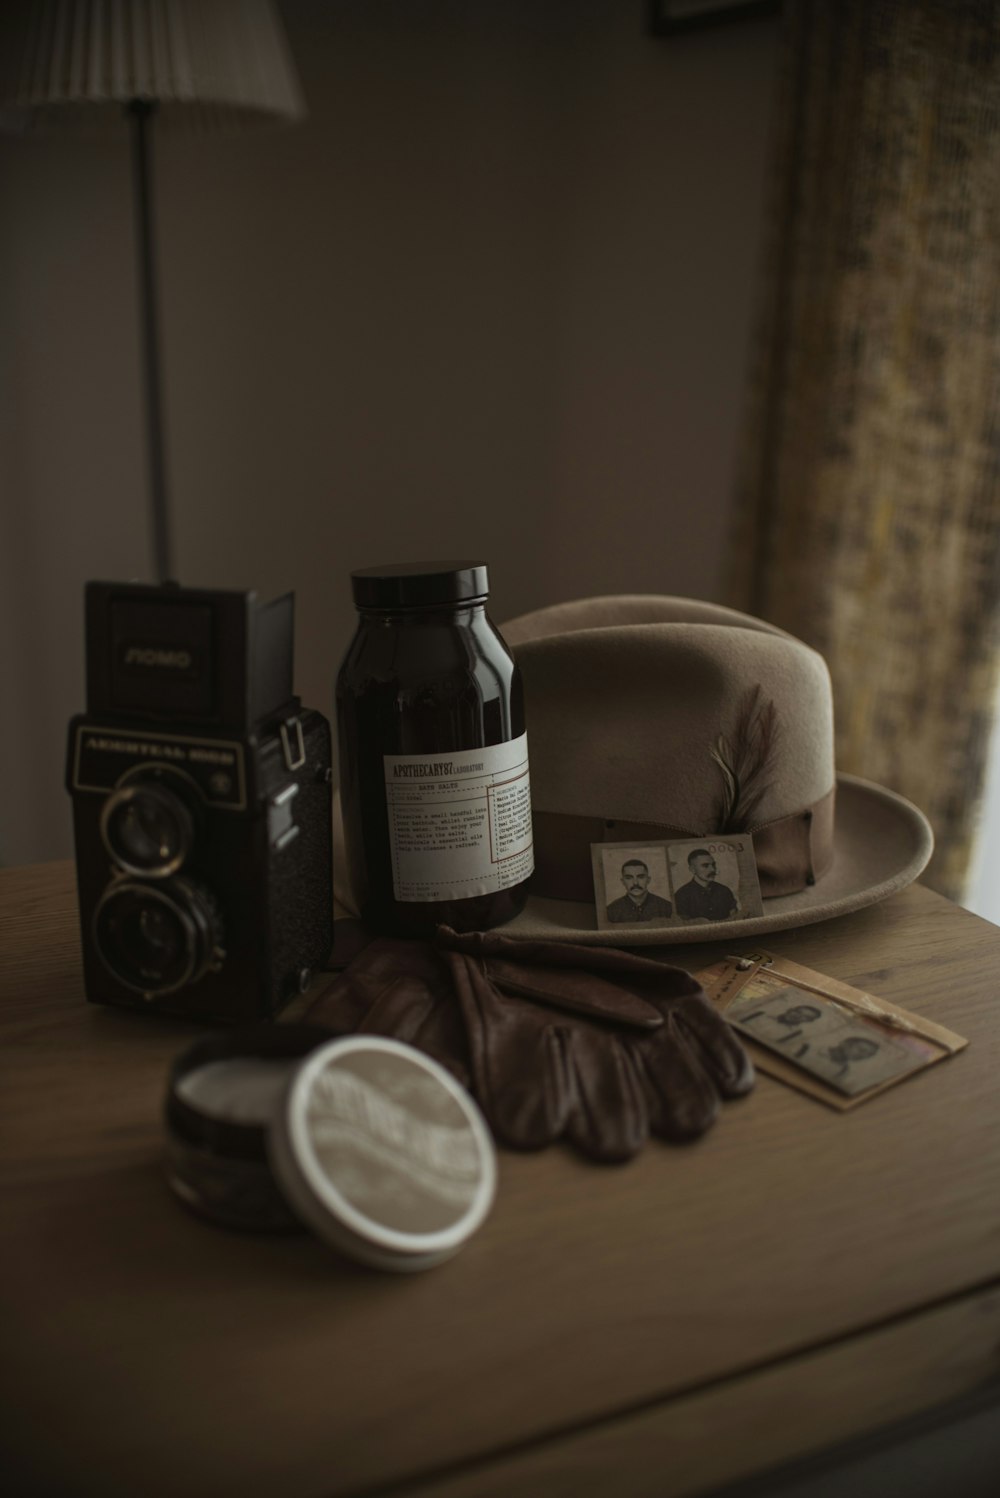 black and white labeled bottle beside brown leather bag on brown wooden table